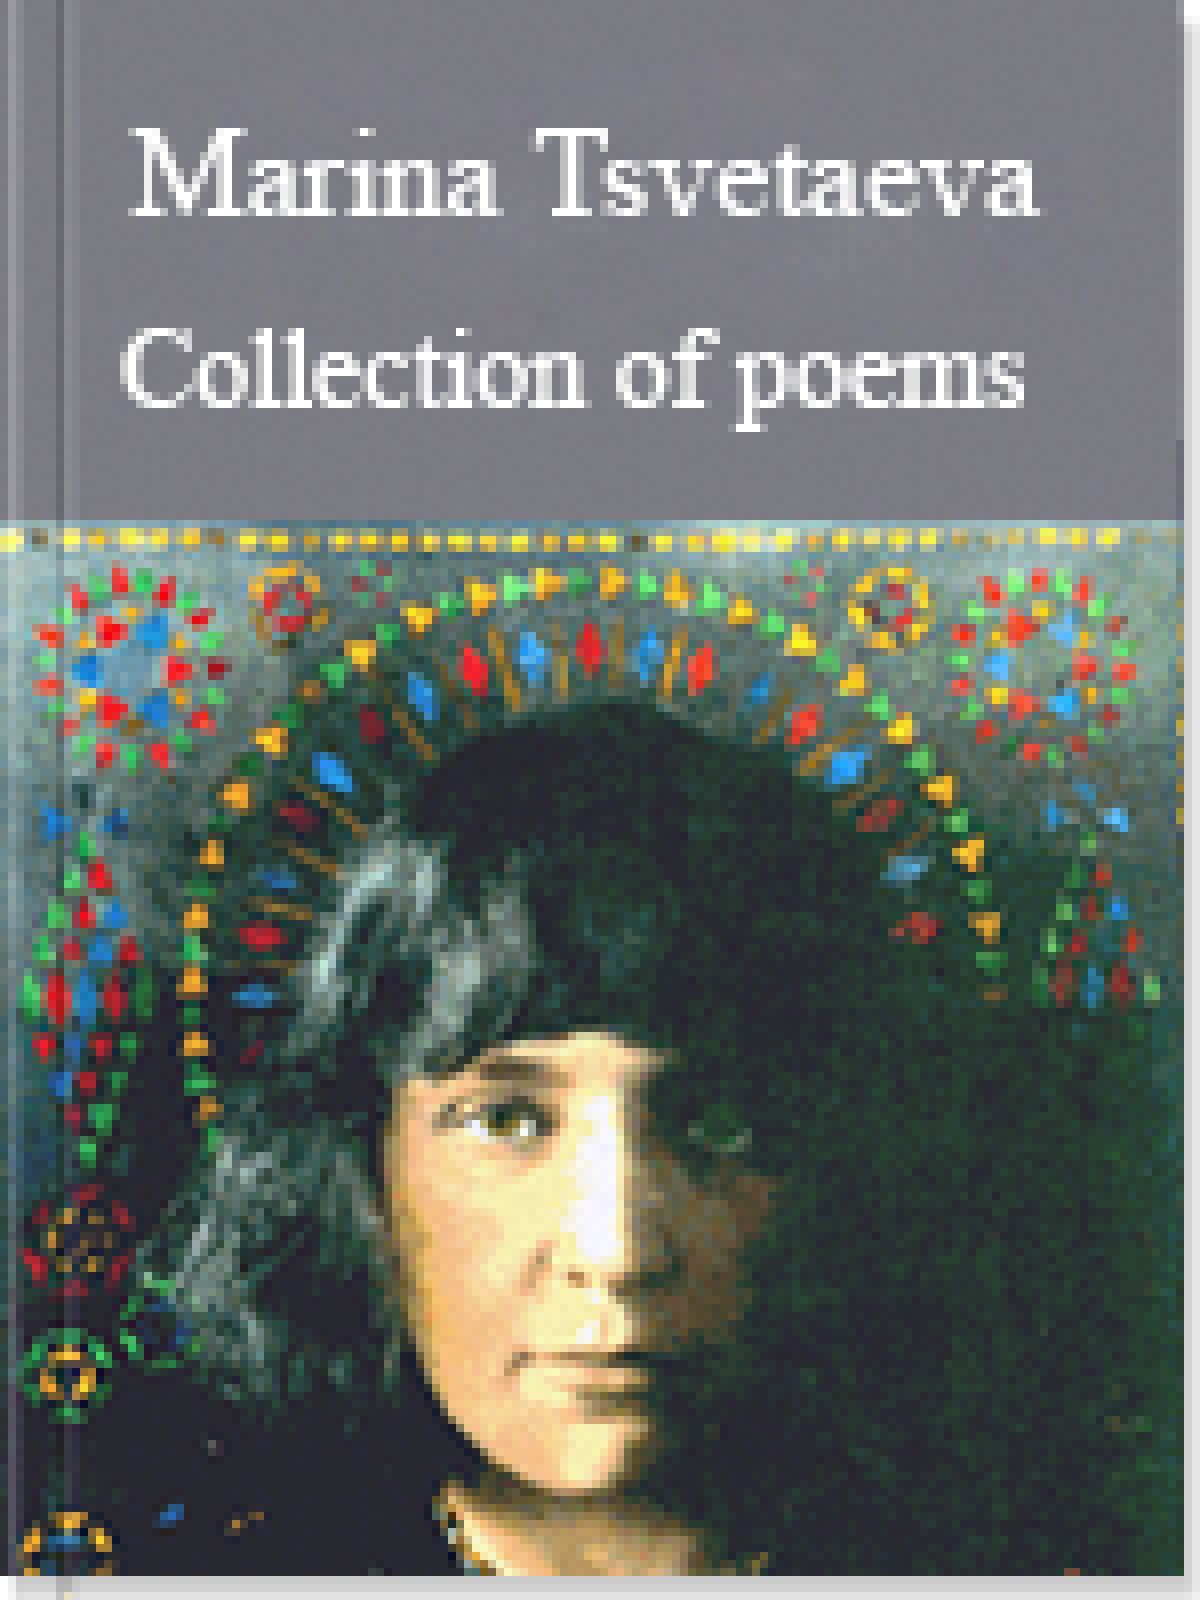 Collections of poems